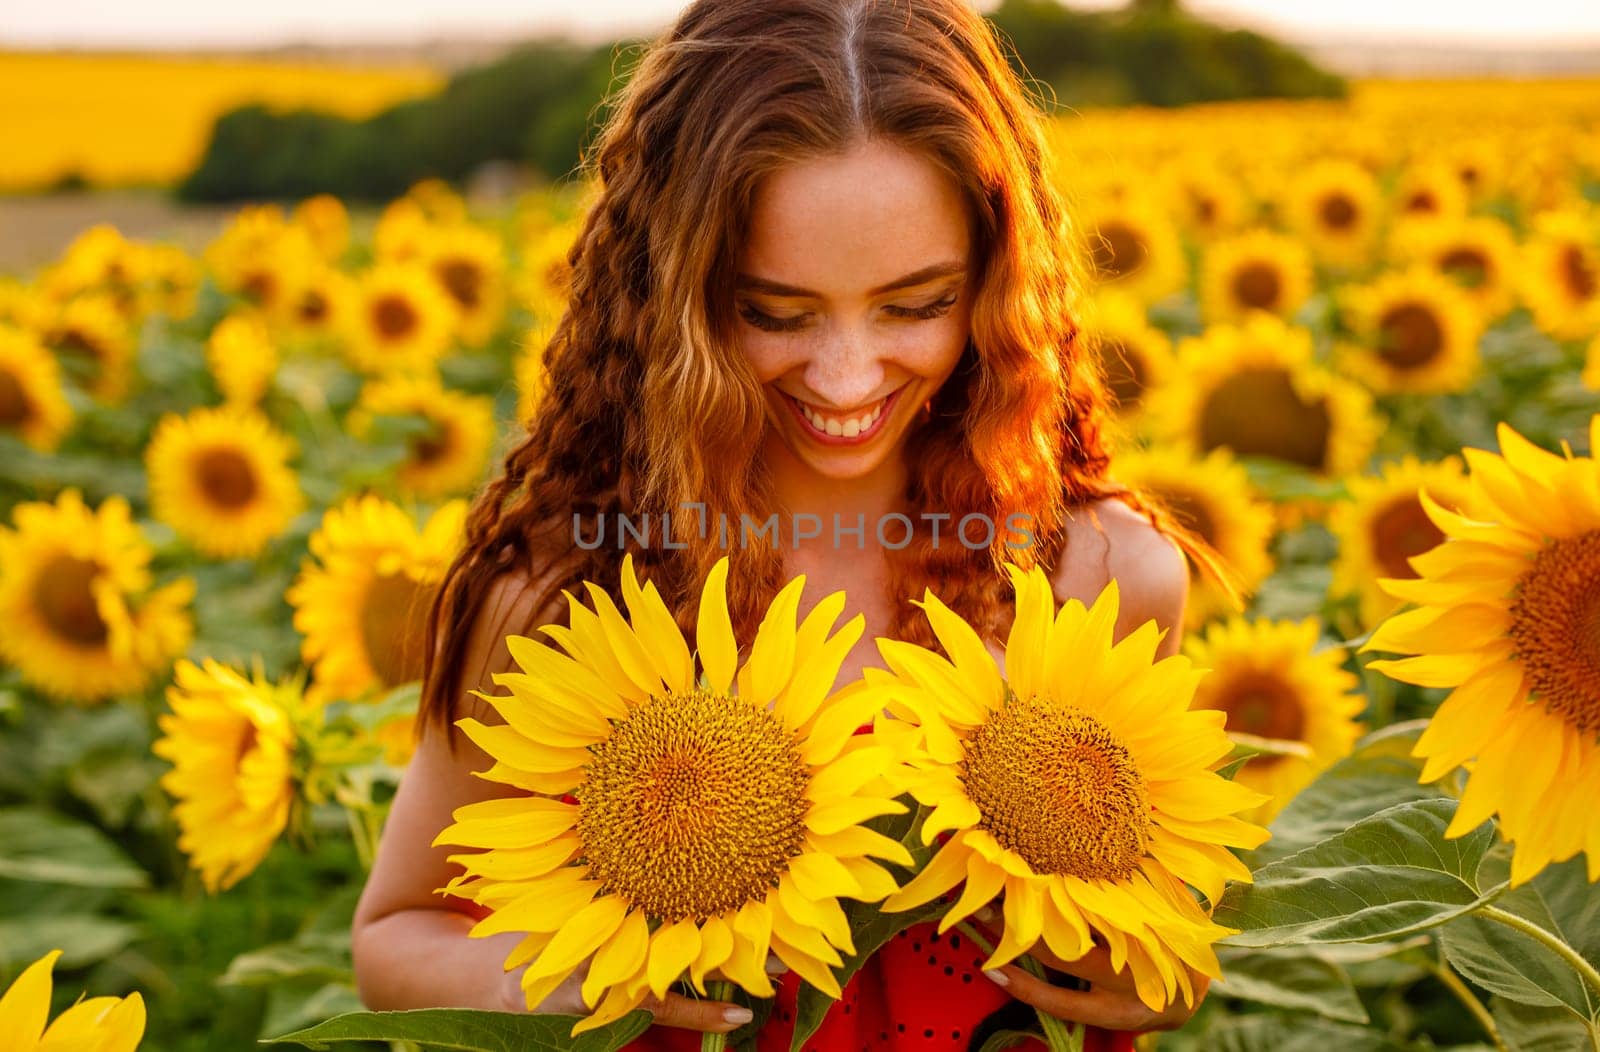 Cute young woman is holding sunflower in her hand while standing in field at sunset. Beautiful gentle girl of Caucasian ethnicity in red dress in the rays of setting sun. The concept of natural